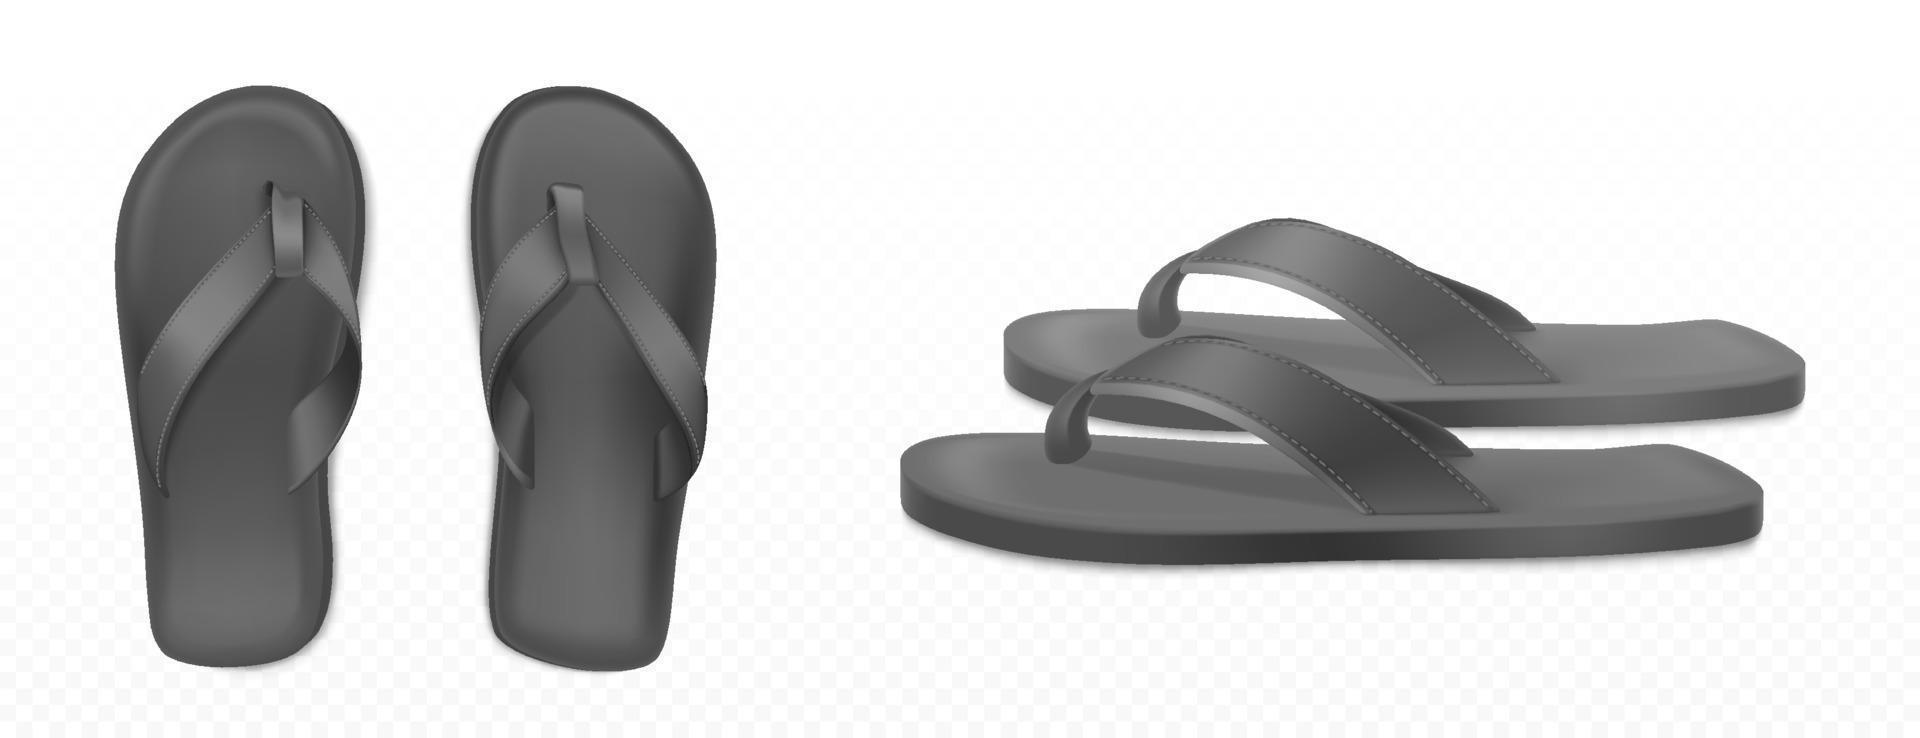 Black summer rubber slippers for beach or pool vector